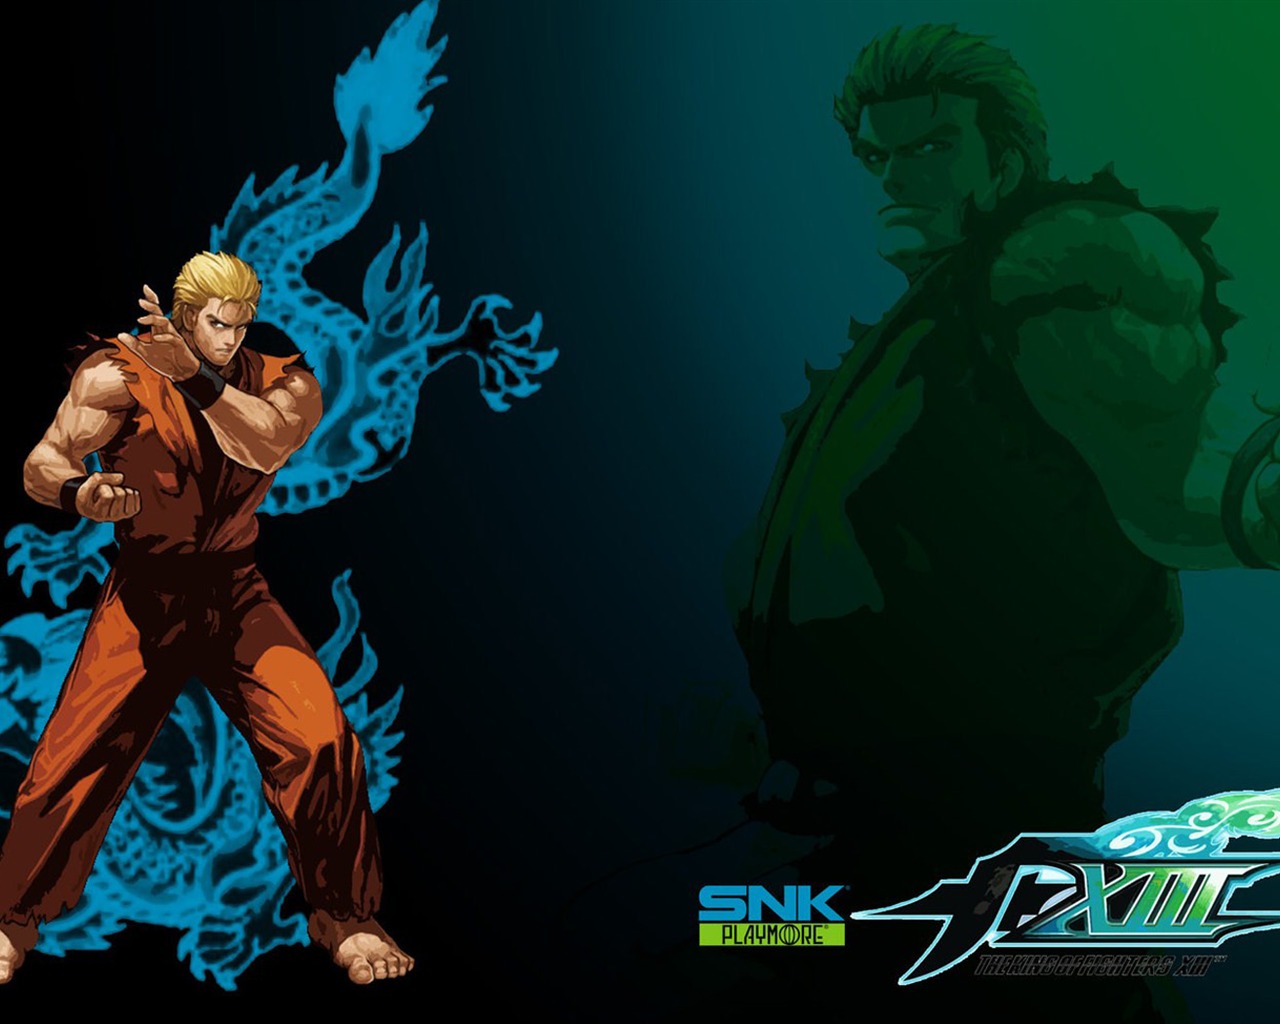 The King of Fighters XIII 拳皇13 壁纸专辑2 - 1280x1024